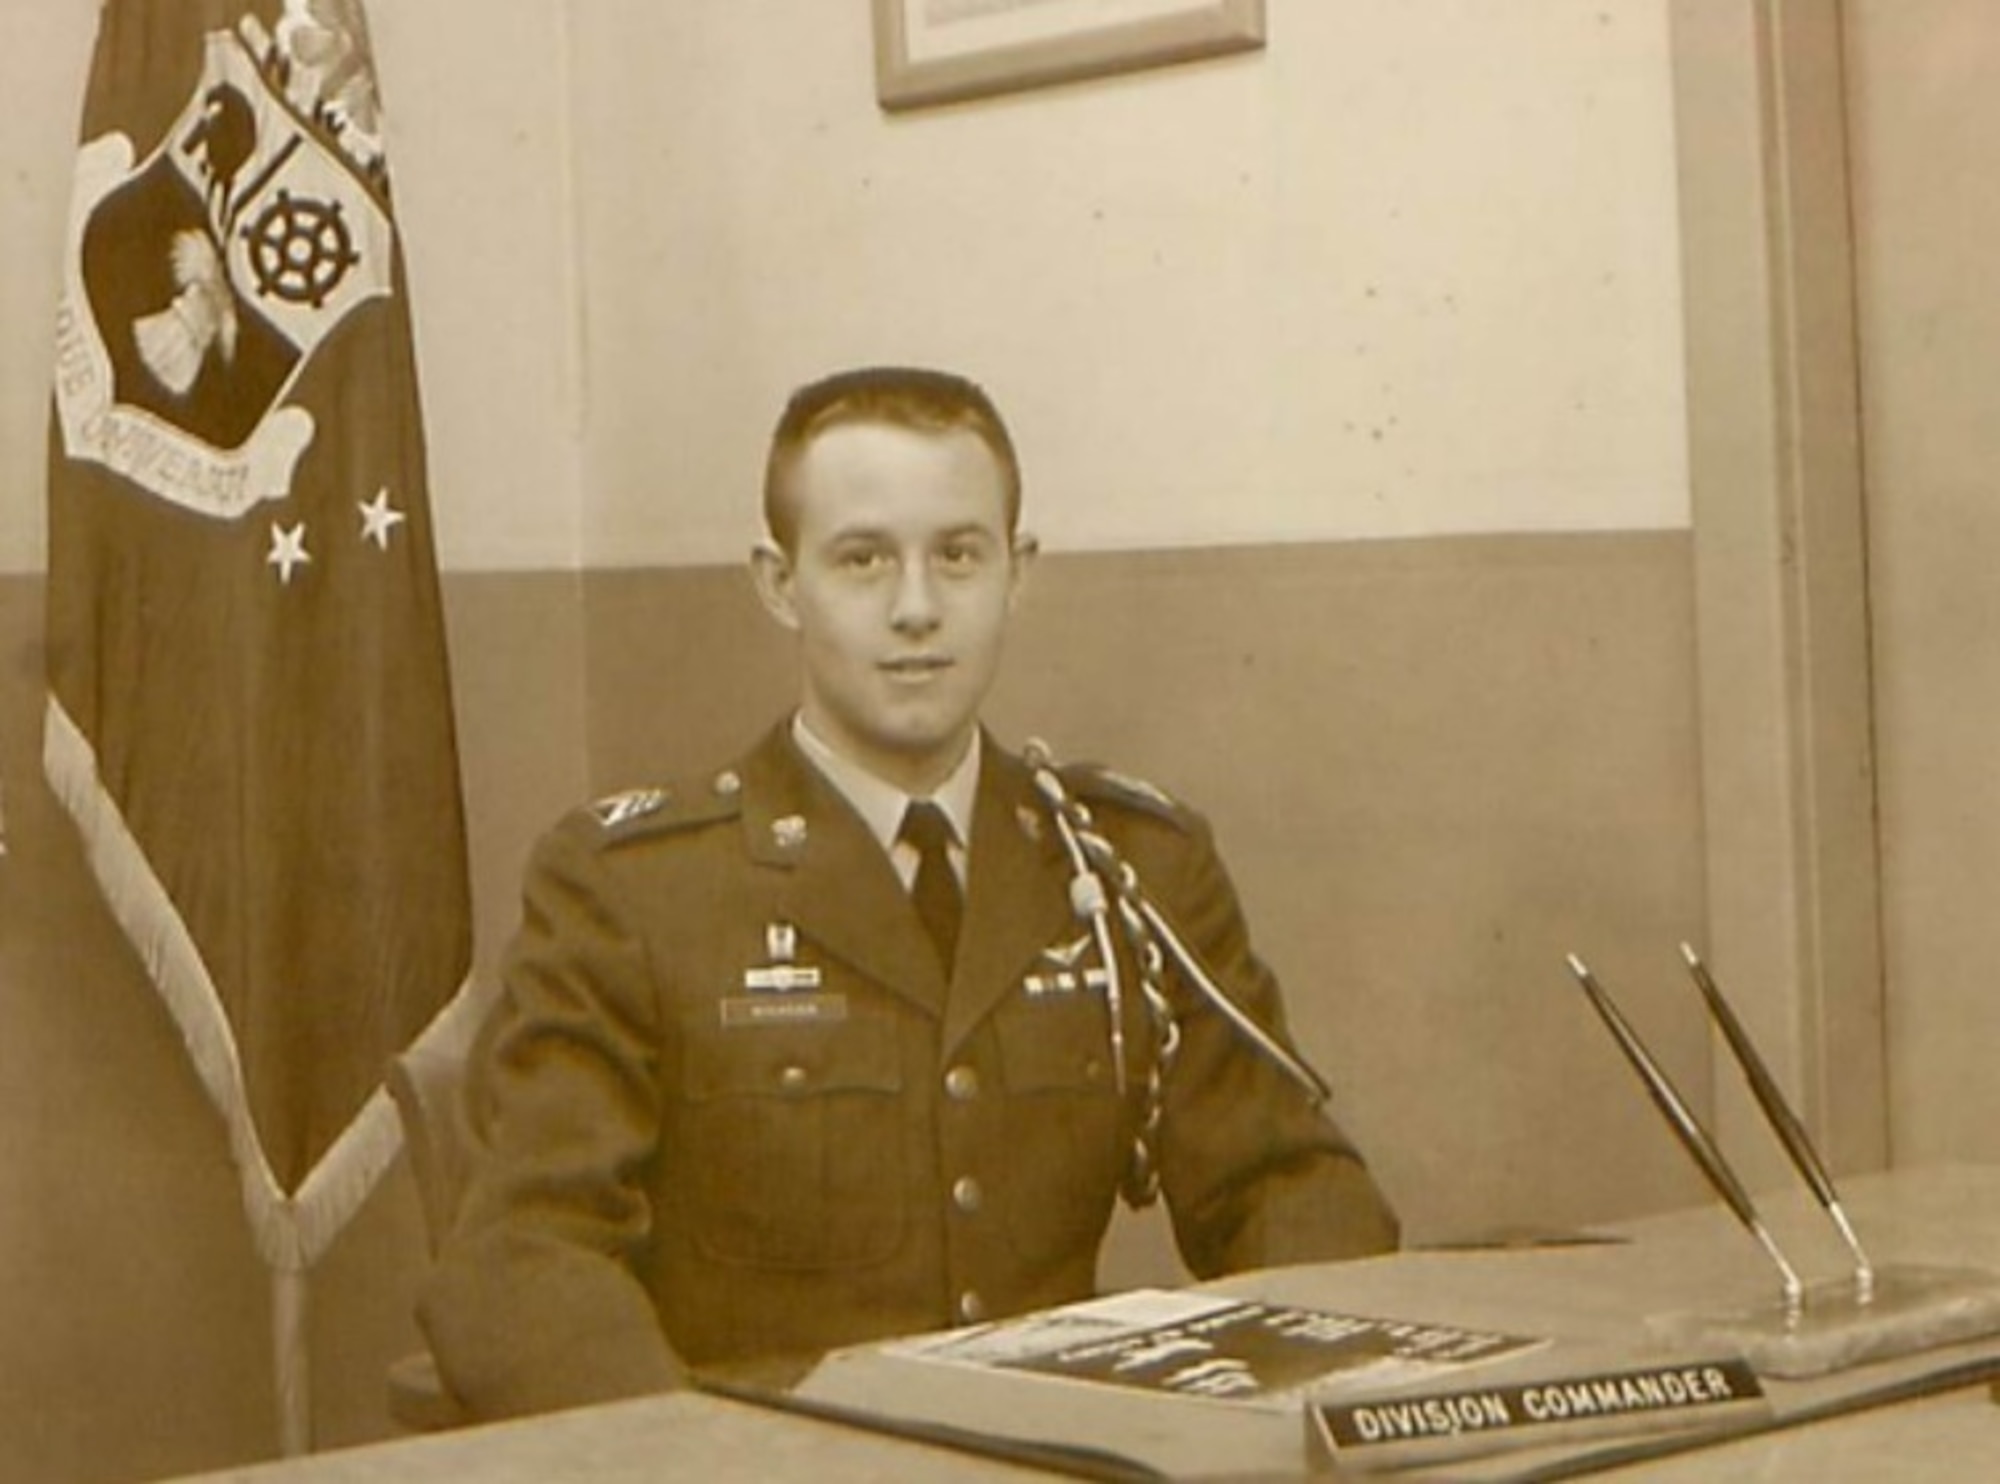 Cadet Colonel Lee Hitchcock at Purdue University in 1962. (U.S. Air Force photo)